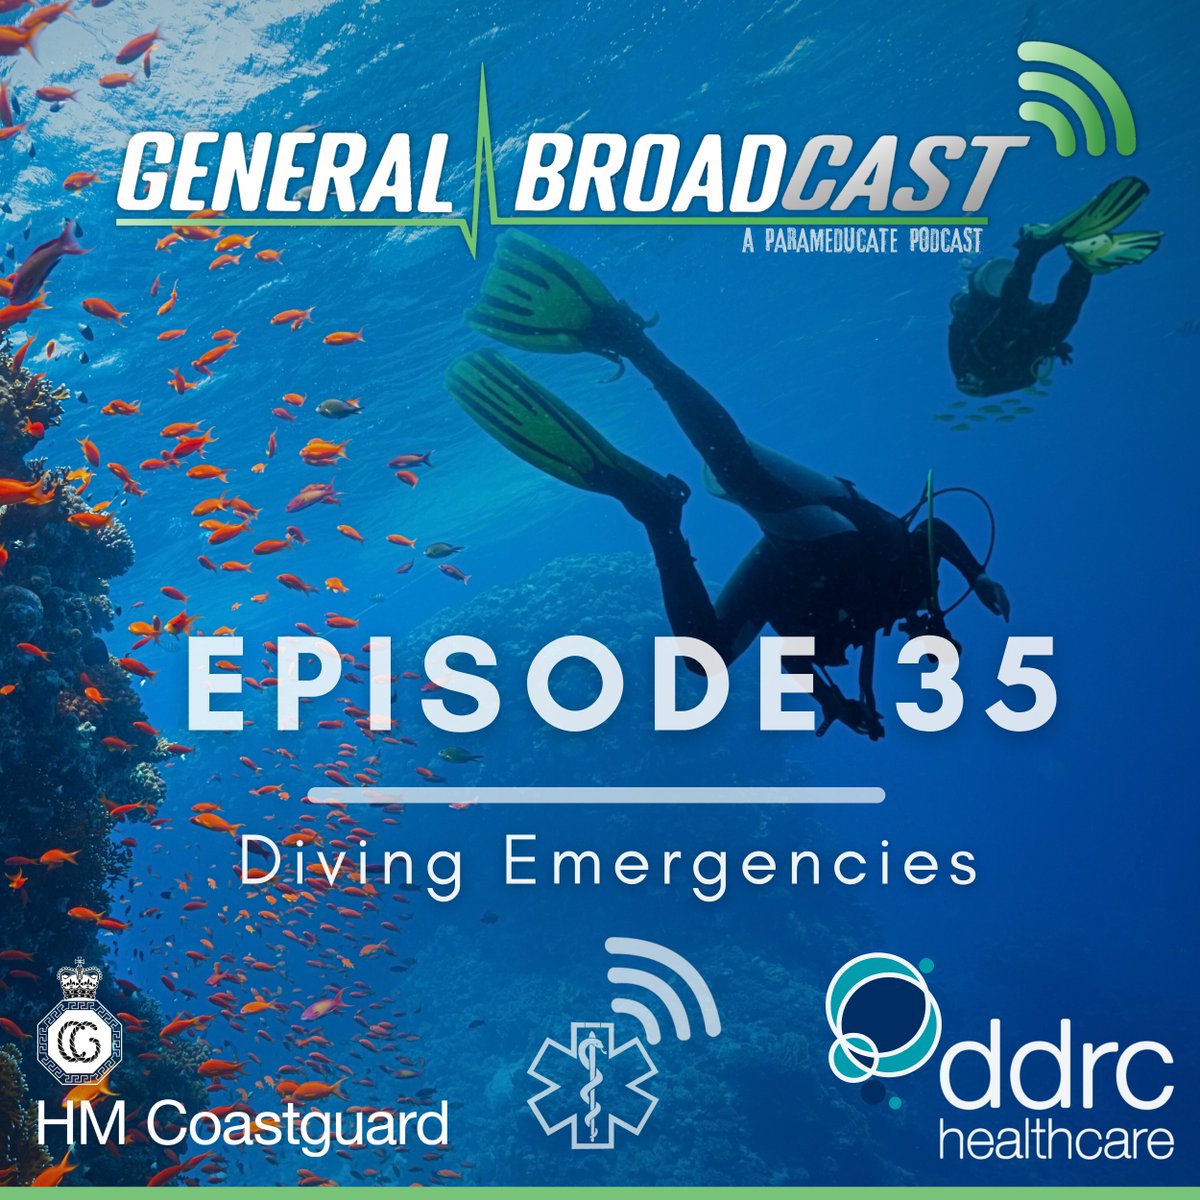 Our latest podcast is out now! Thanks to support from @DDRCPlymouth and colleagues from @HMCoastguard. This month we look at Diving Emergencies and what we can do to manage unwell divers. Find us wherever you get your podcasts. open.spotify.com/episode/1Yn8lg… podcasts.apple.com/gb/podcast/div…